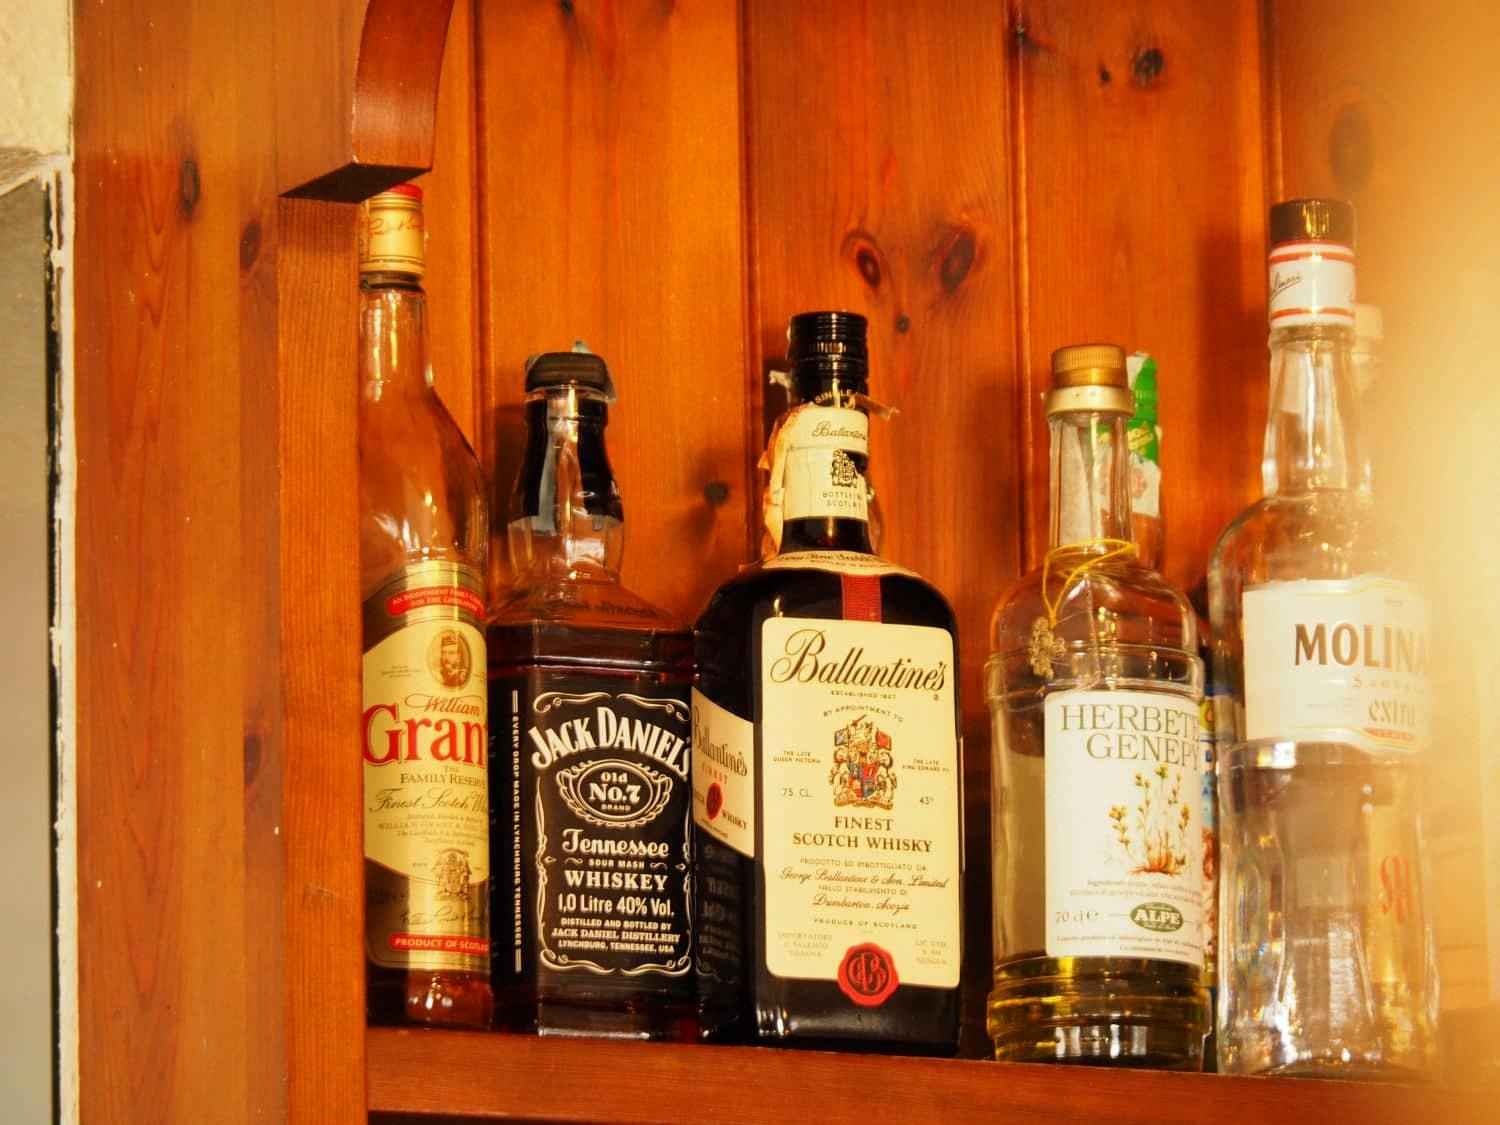 how to store whiskey